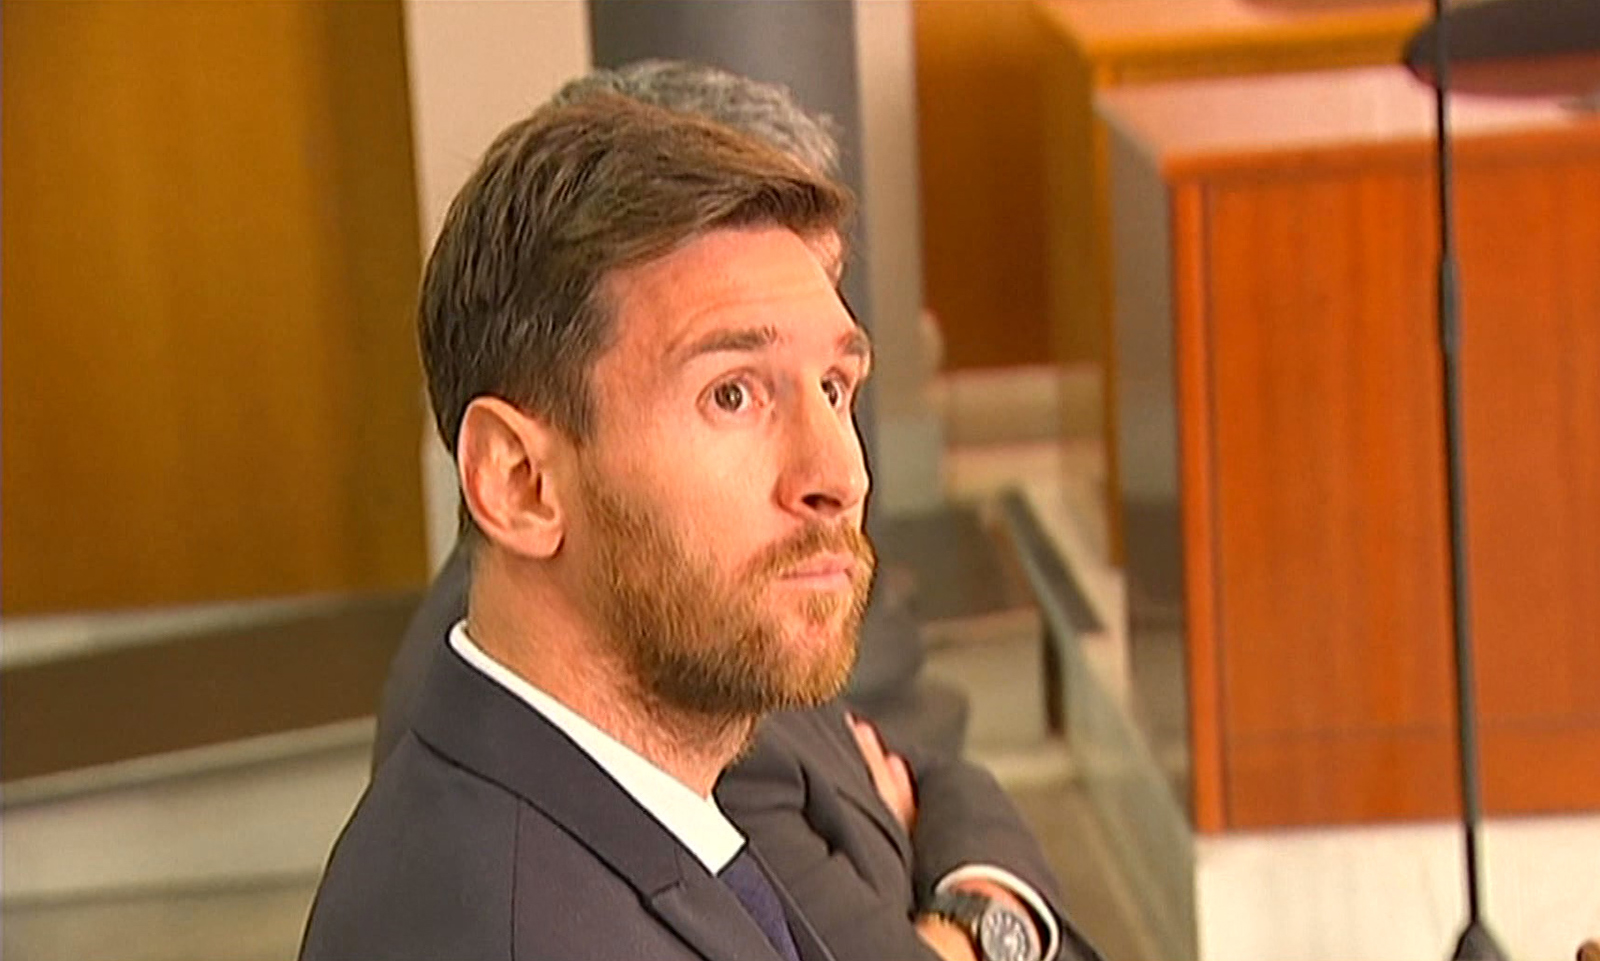 Soccer star Messi sentenced to 21 months in jail for tax fraud